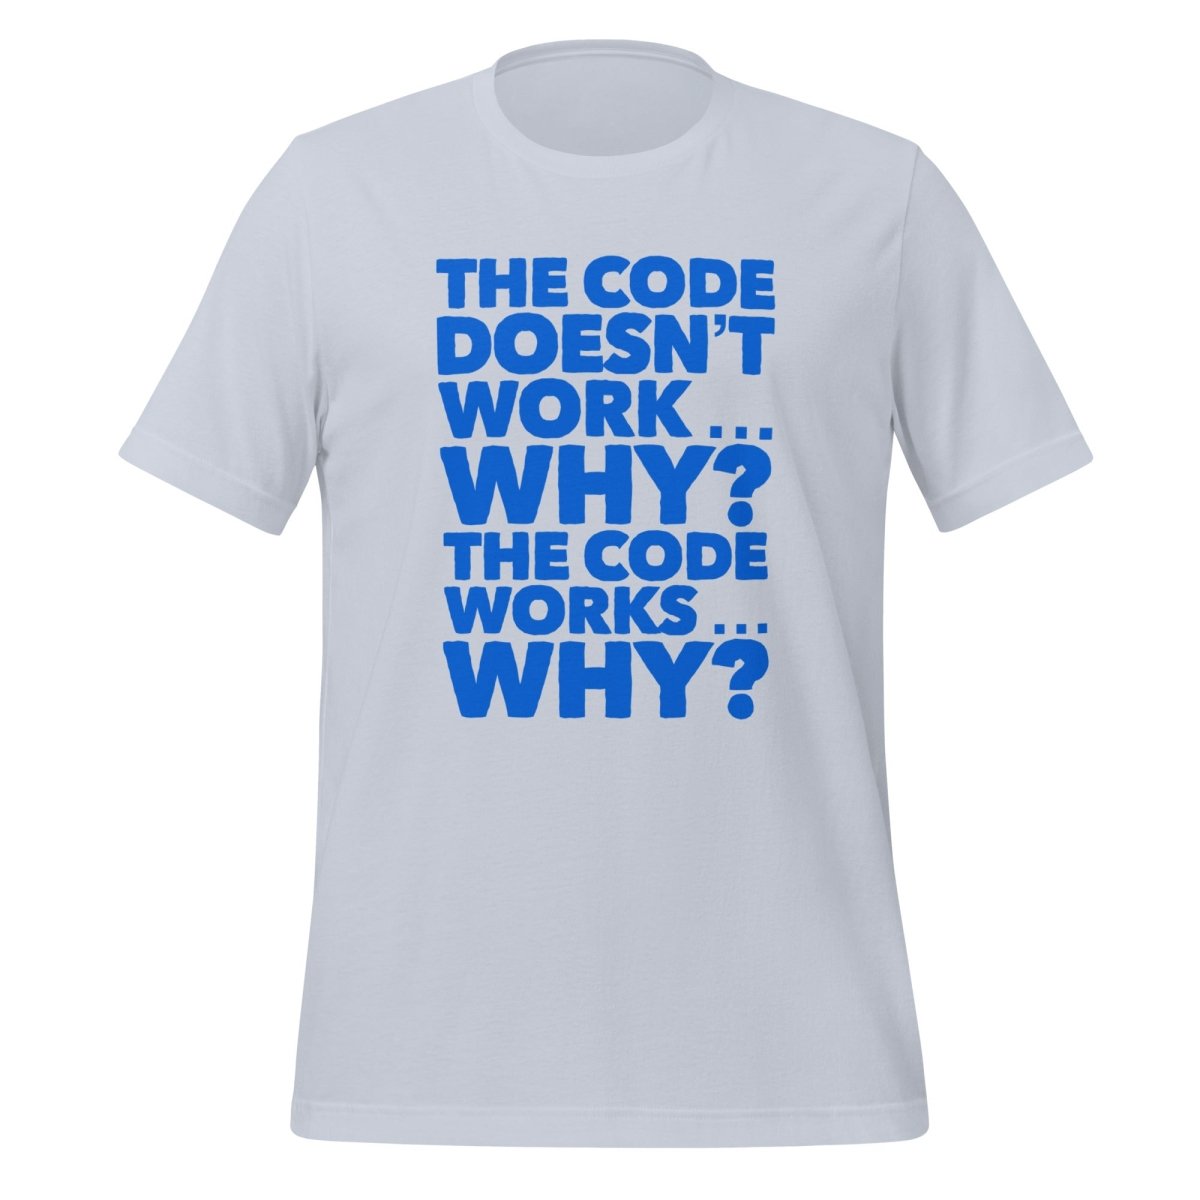 The code doesn't work, why? T - Shirt 2 (unisex) - Light Blue - AI Store